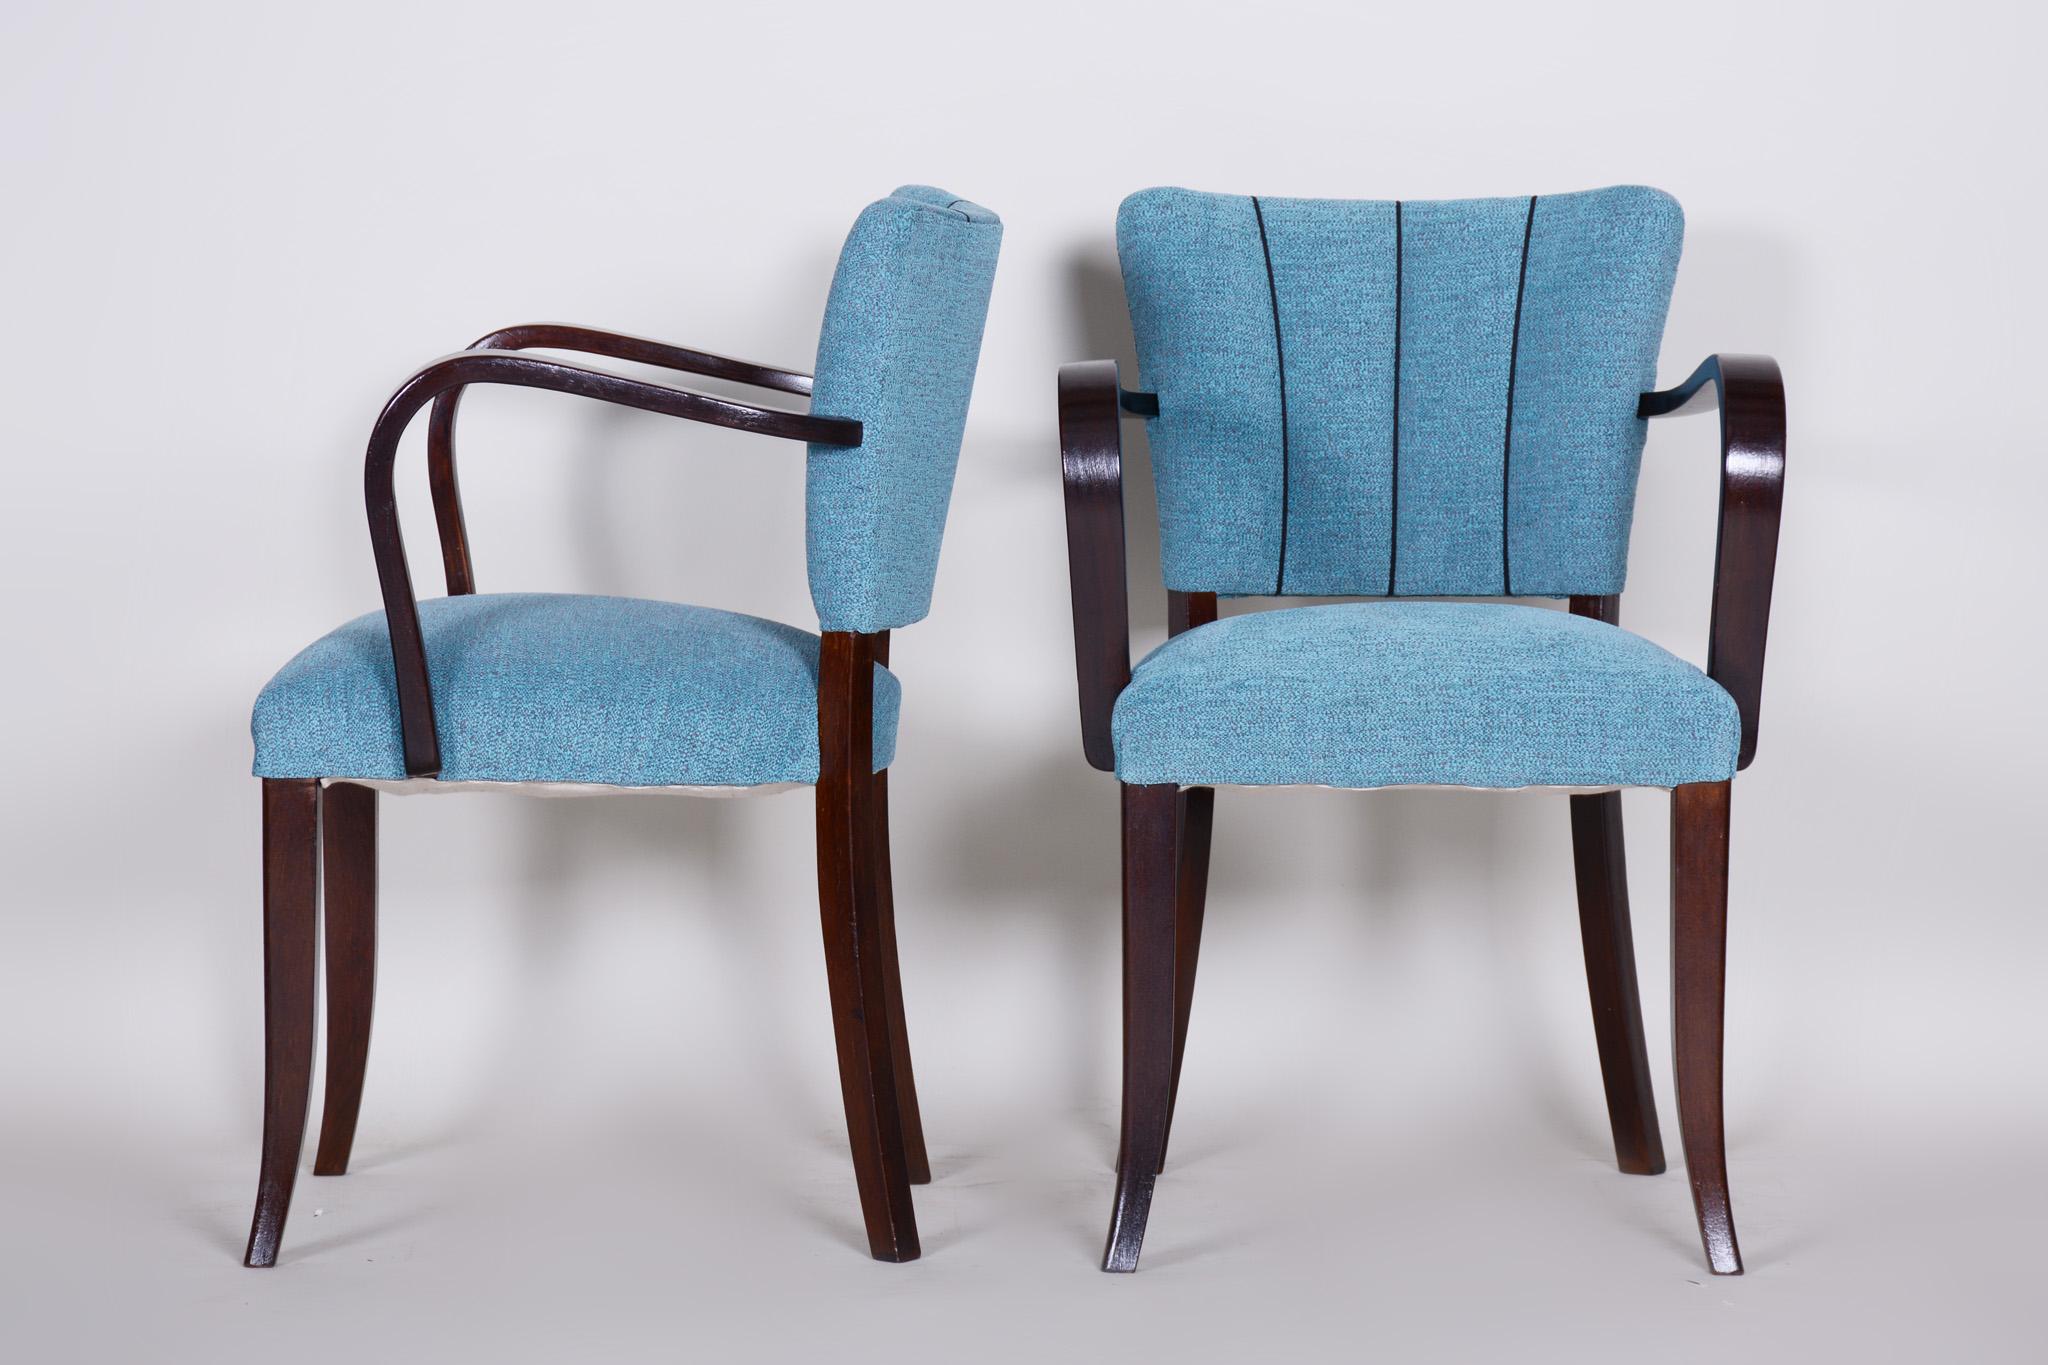 French Pair of Restored Art Deco Blue Oak Armchairs, 1930s, France, New Upholstery